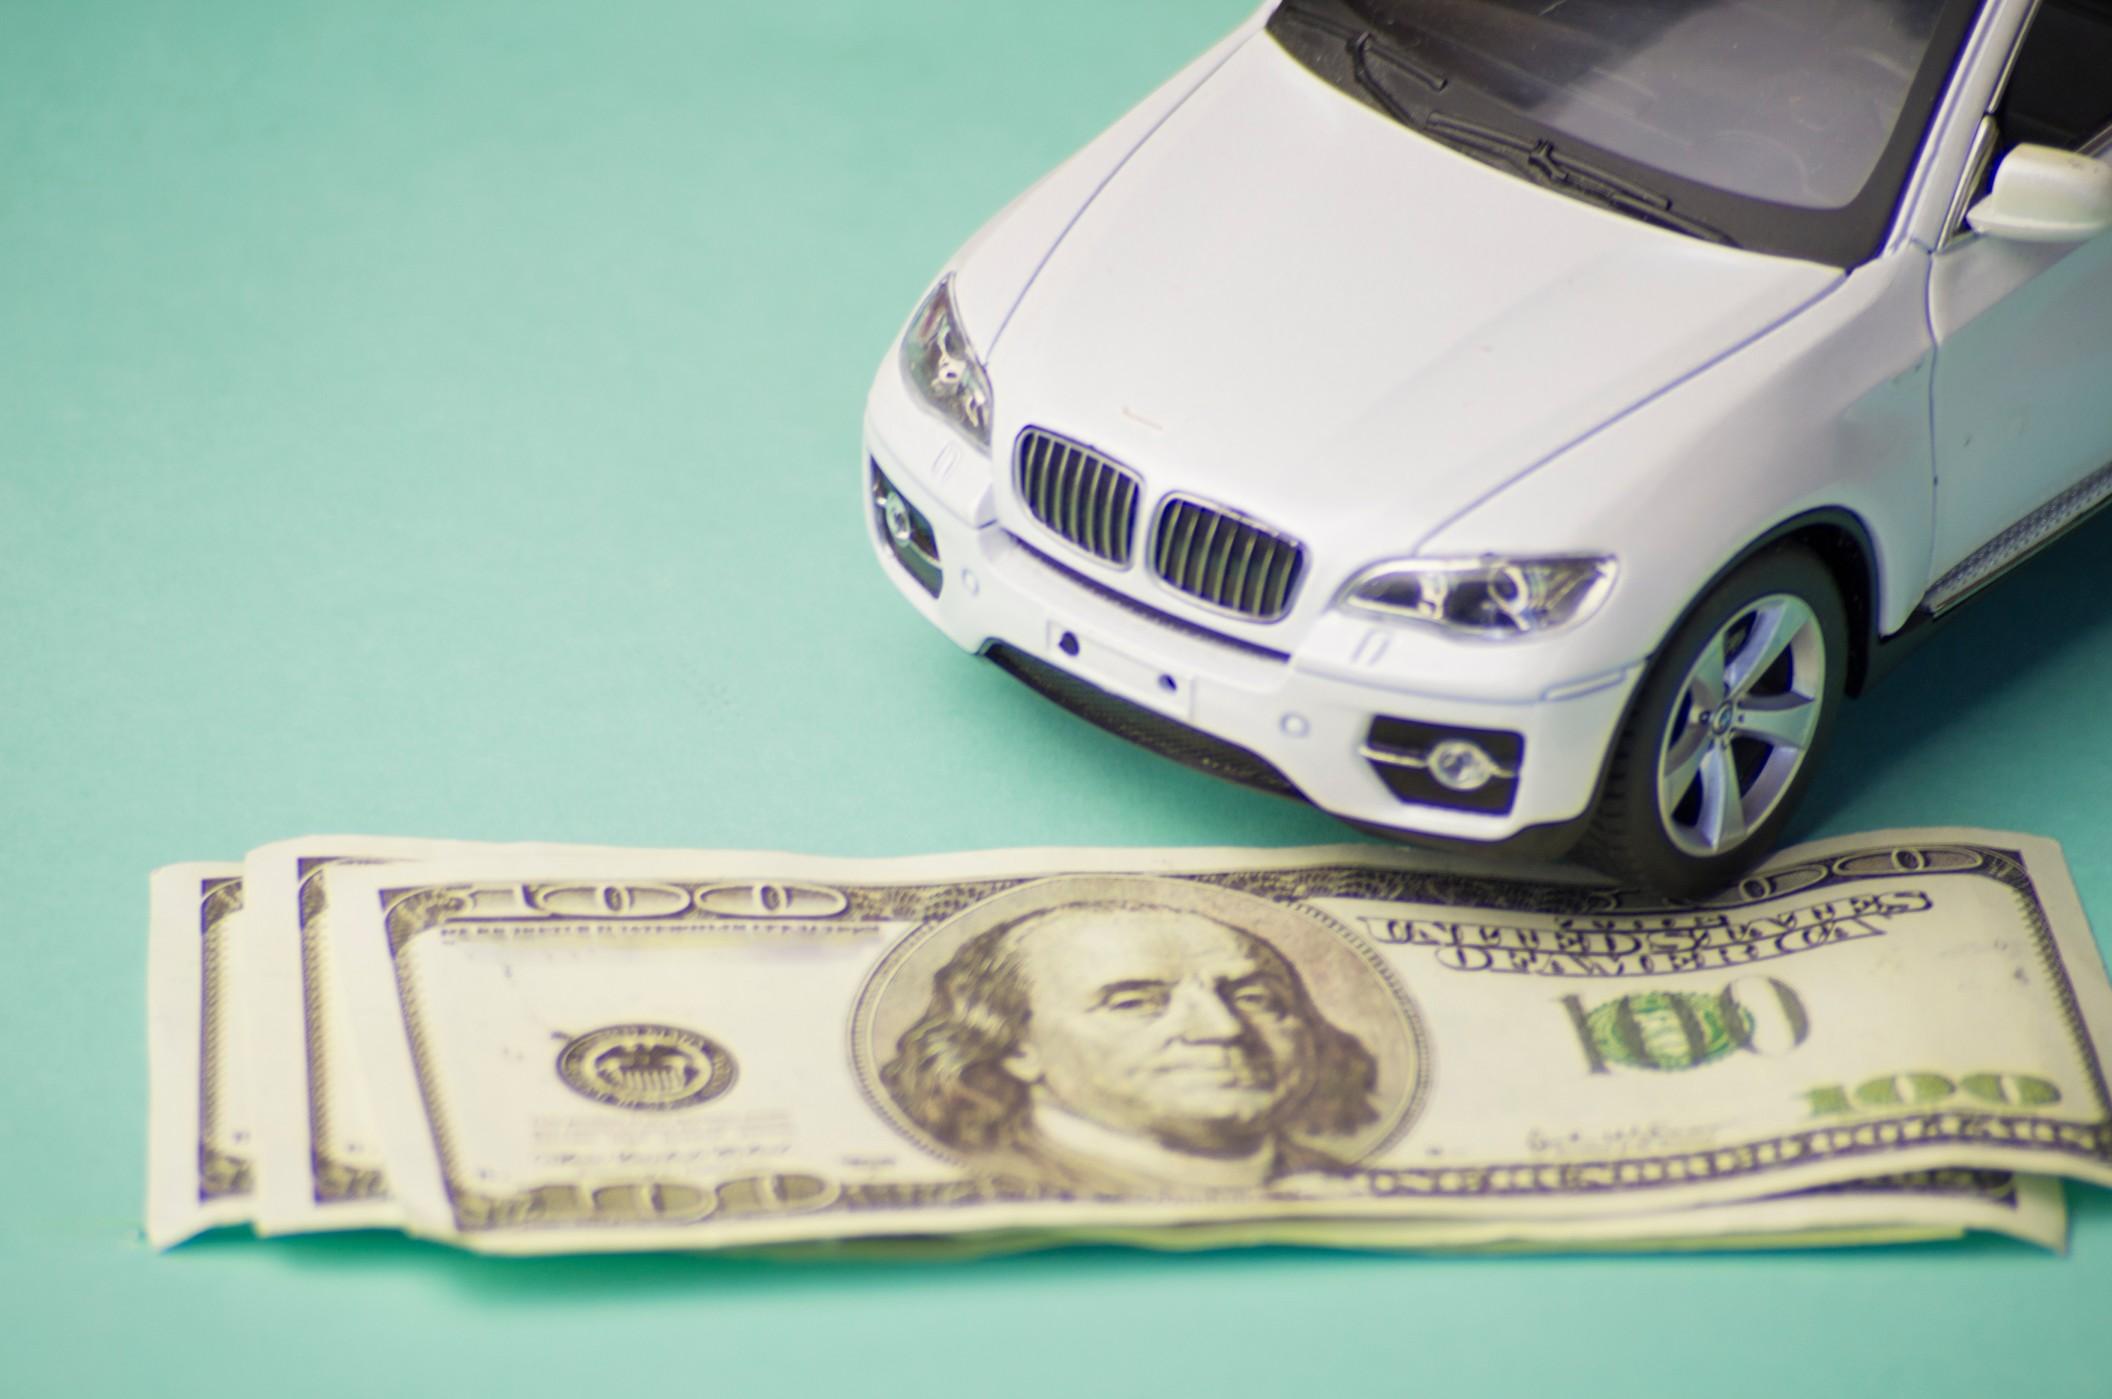 A Florida insurance agent named Victor Schlicht has outlined several cheap car insurance tips.